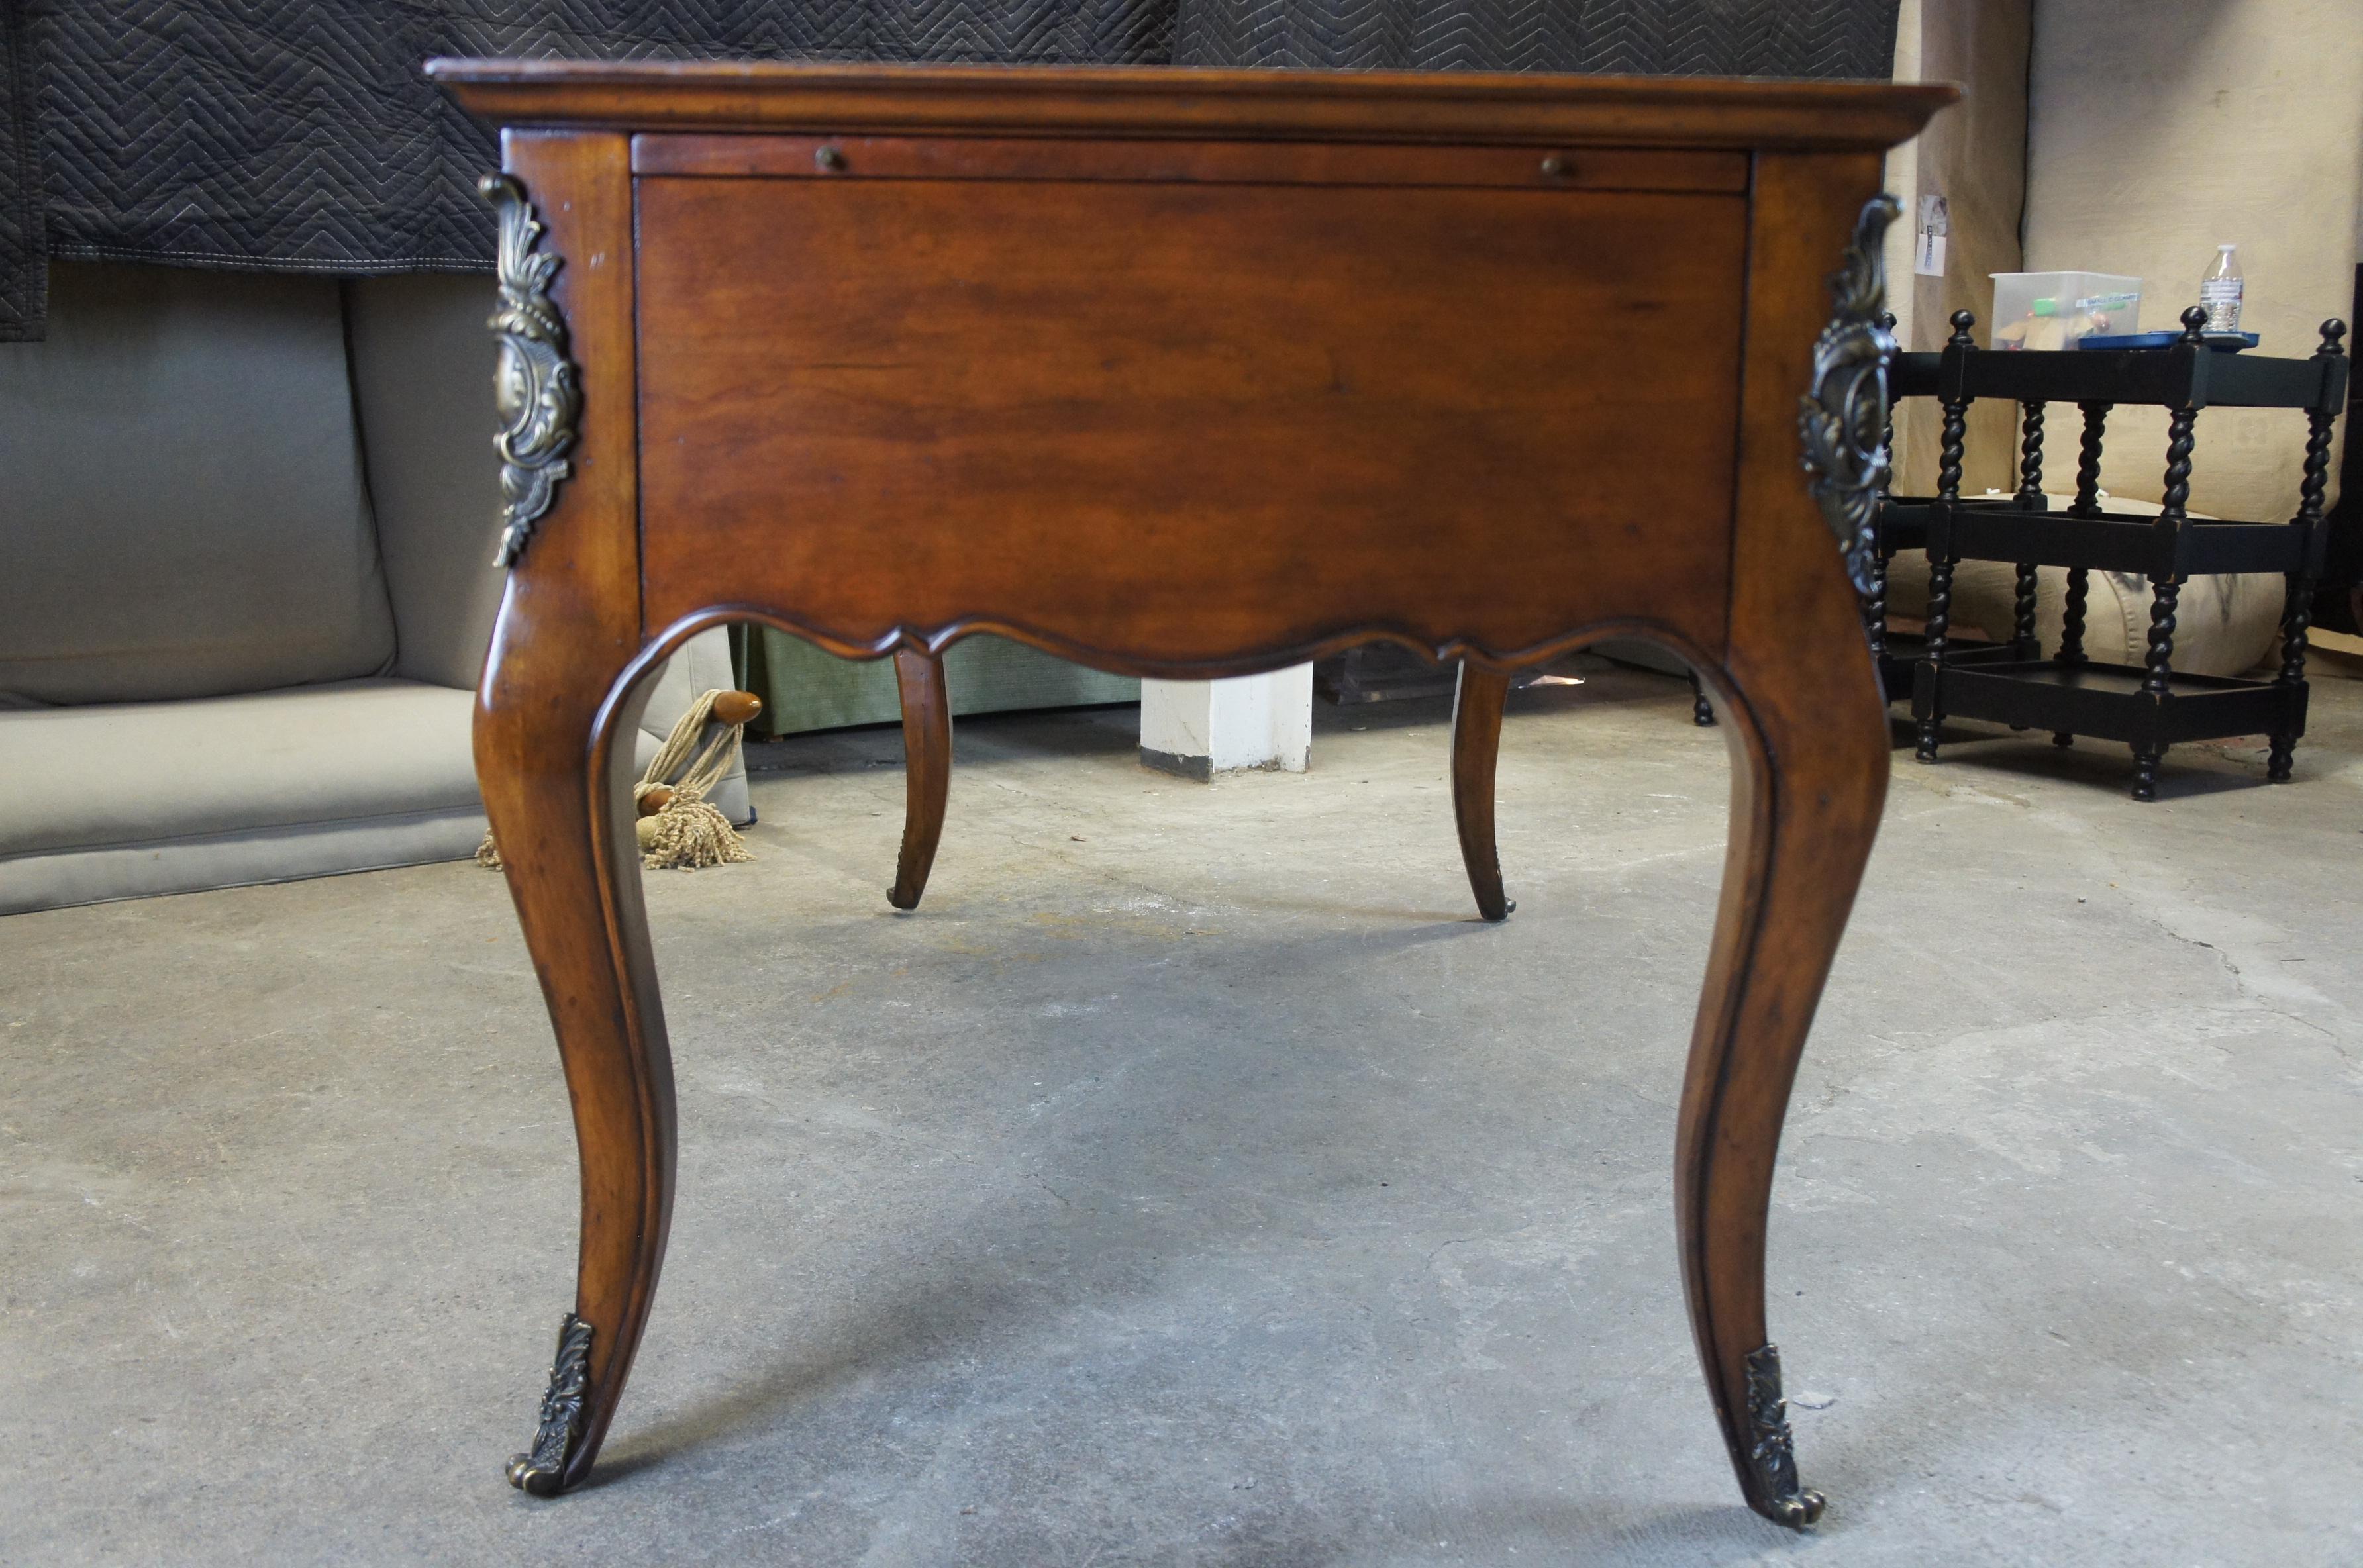 20th Century Drexel Heritage Love Letter Desk 311-910 French Country Cherry Library Leather